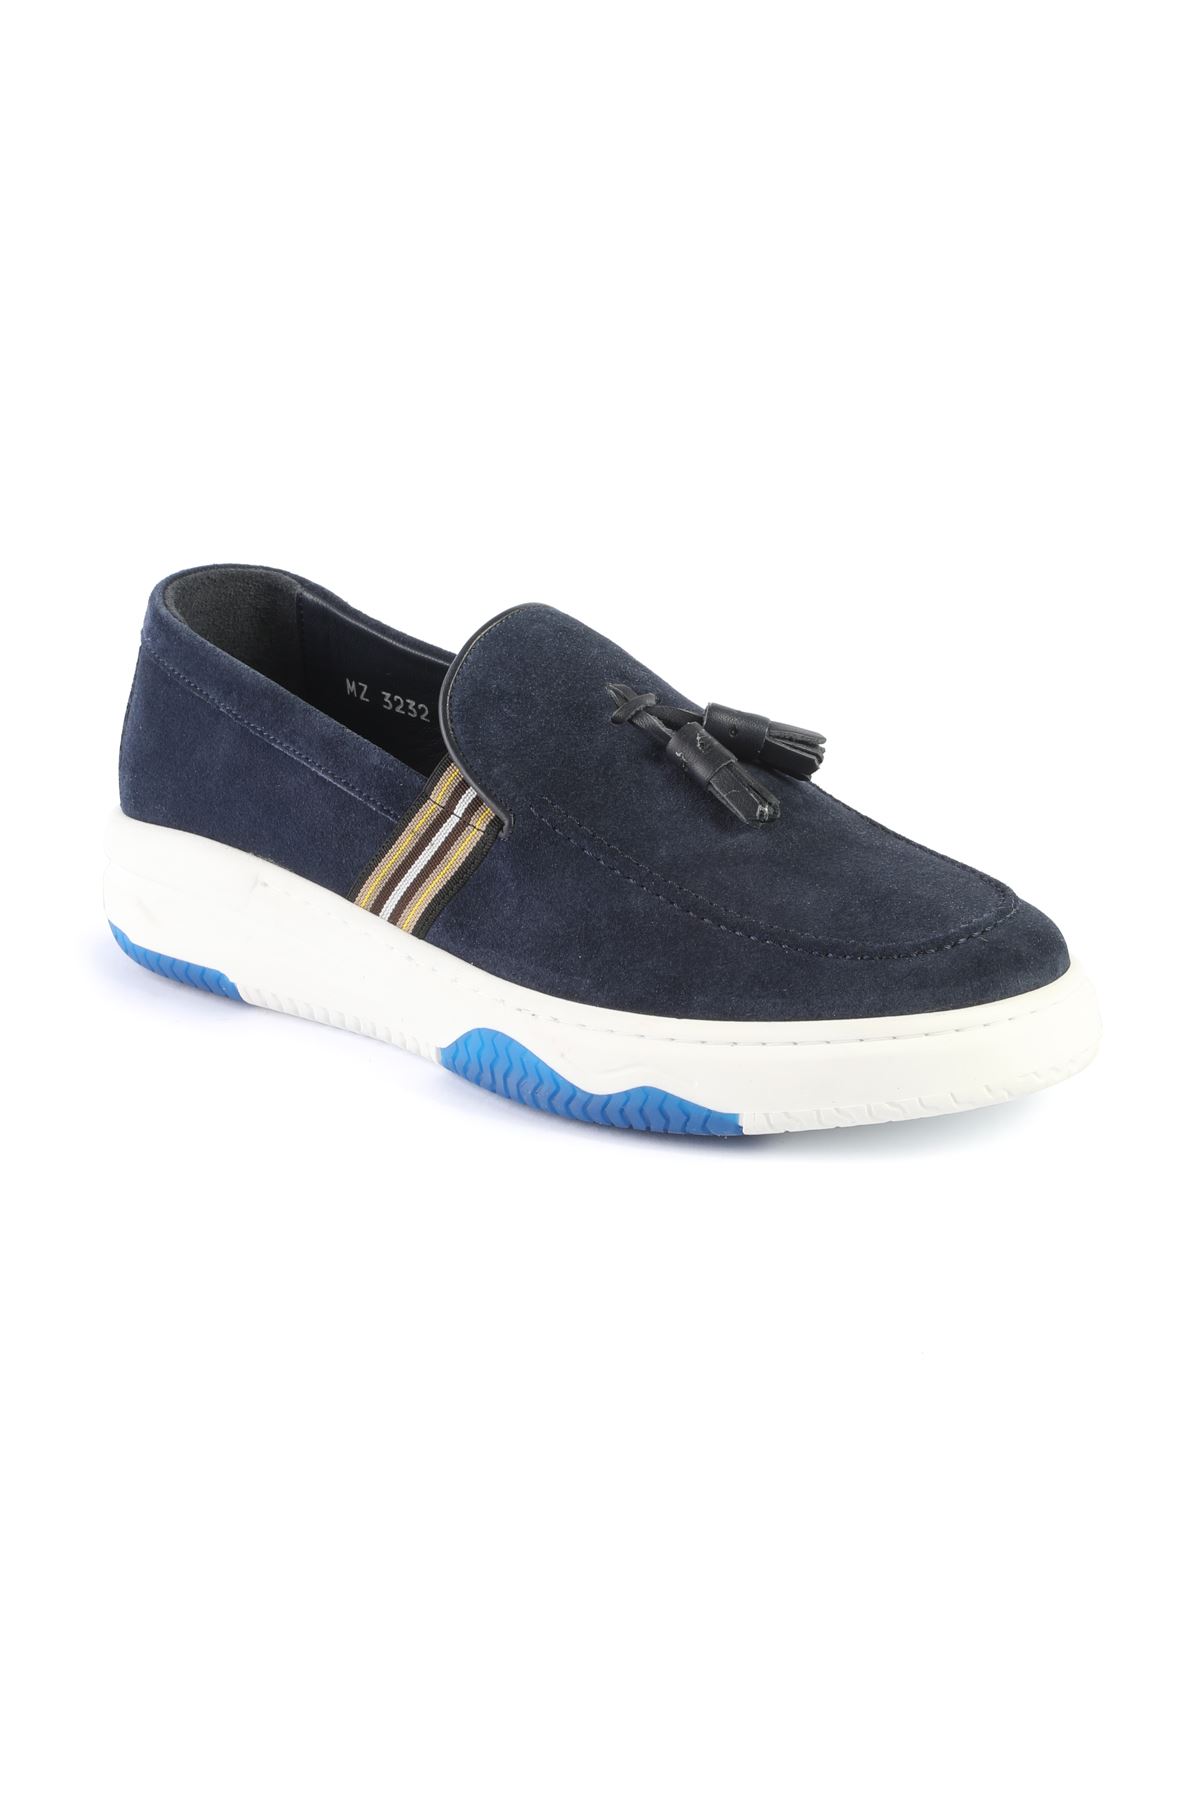 Libero L3232 Navy Blue Loafer Shoes